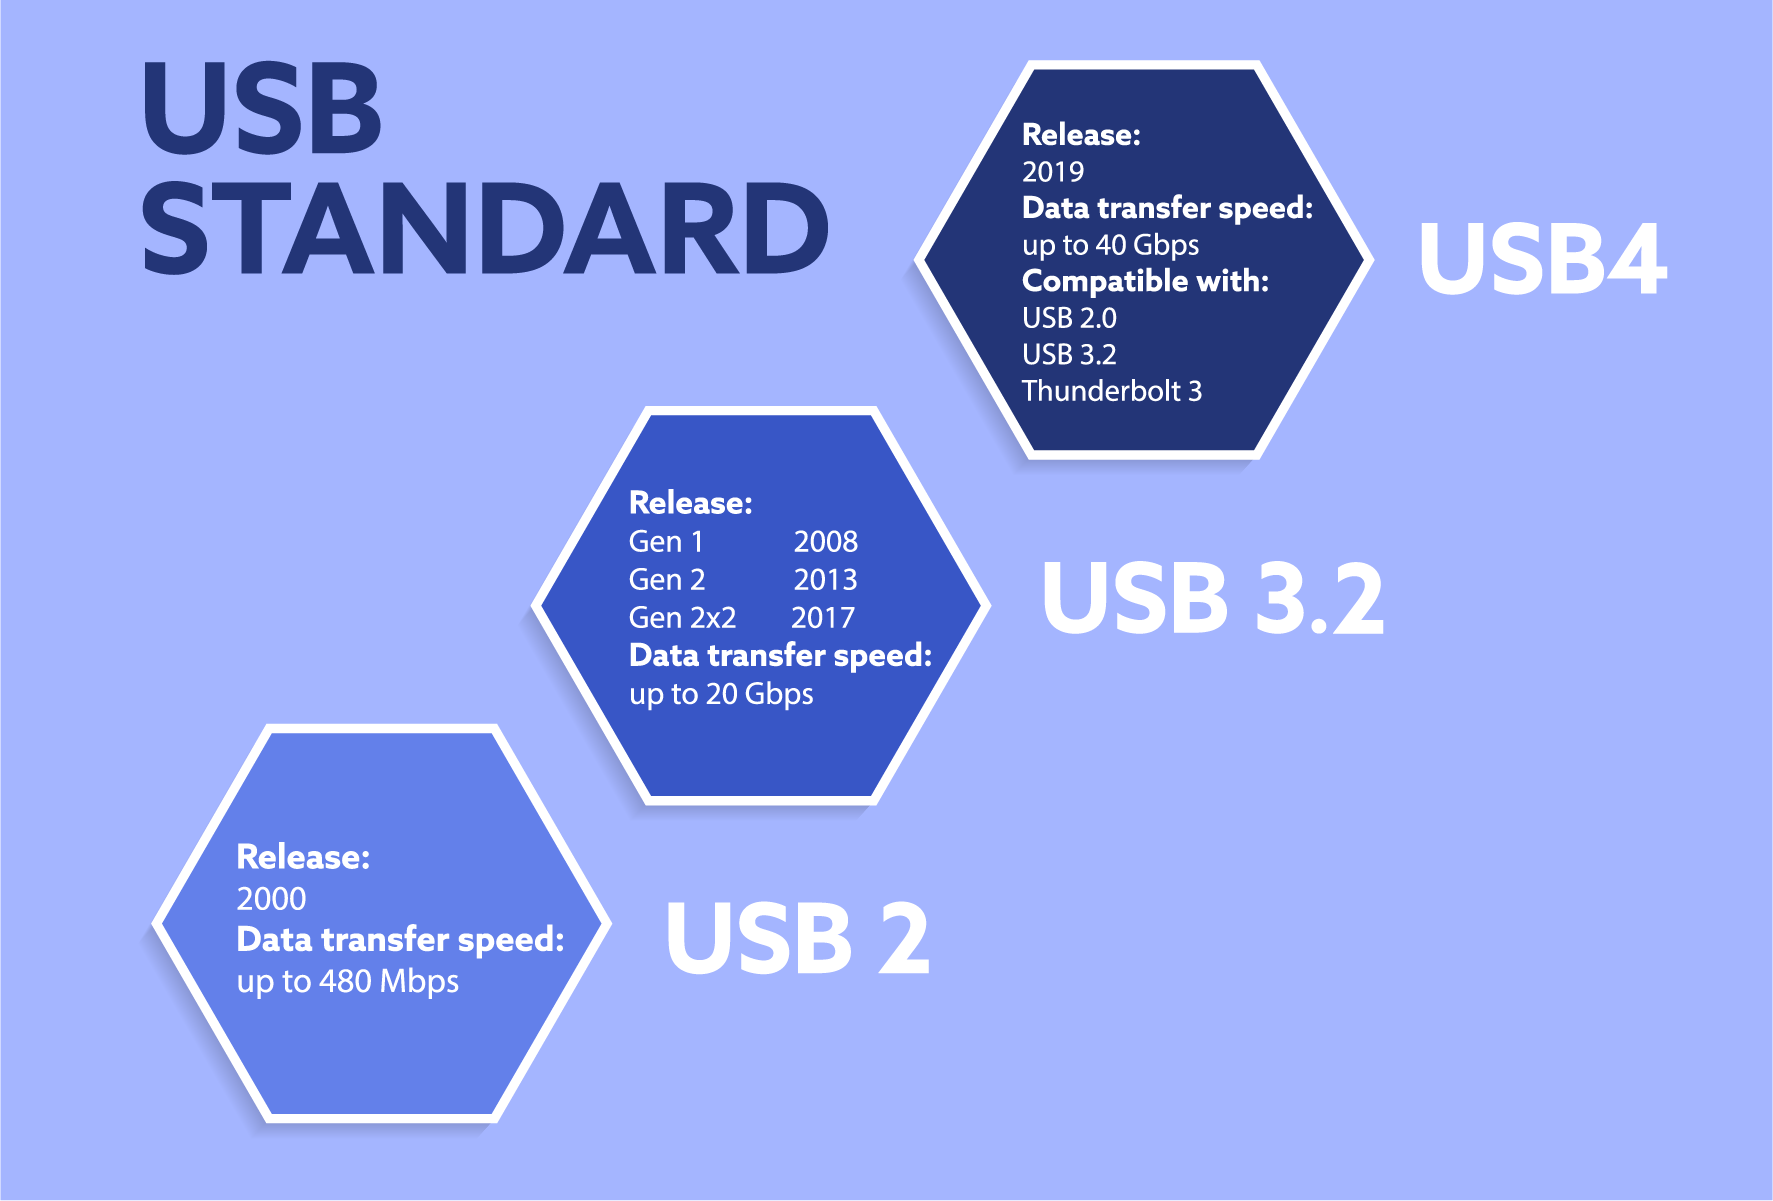 Introducing USB4: The Next Generation of Connectivity Has Arrived